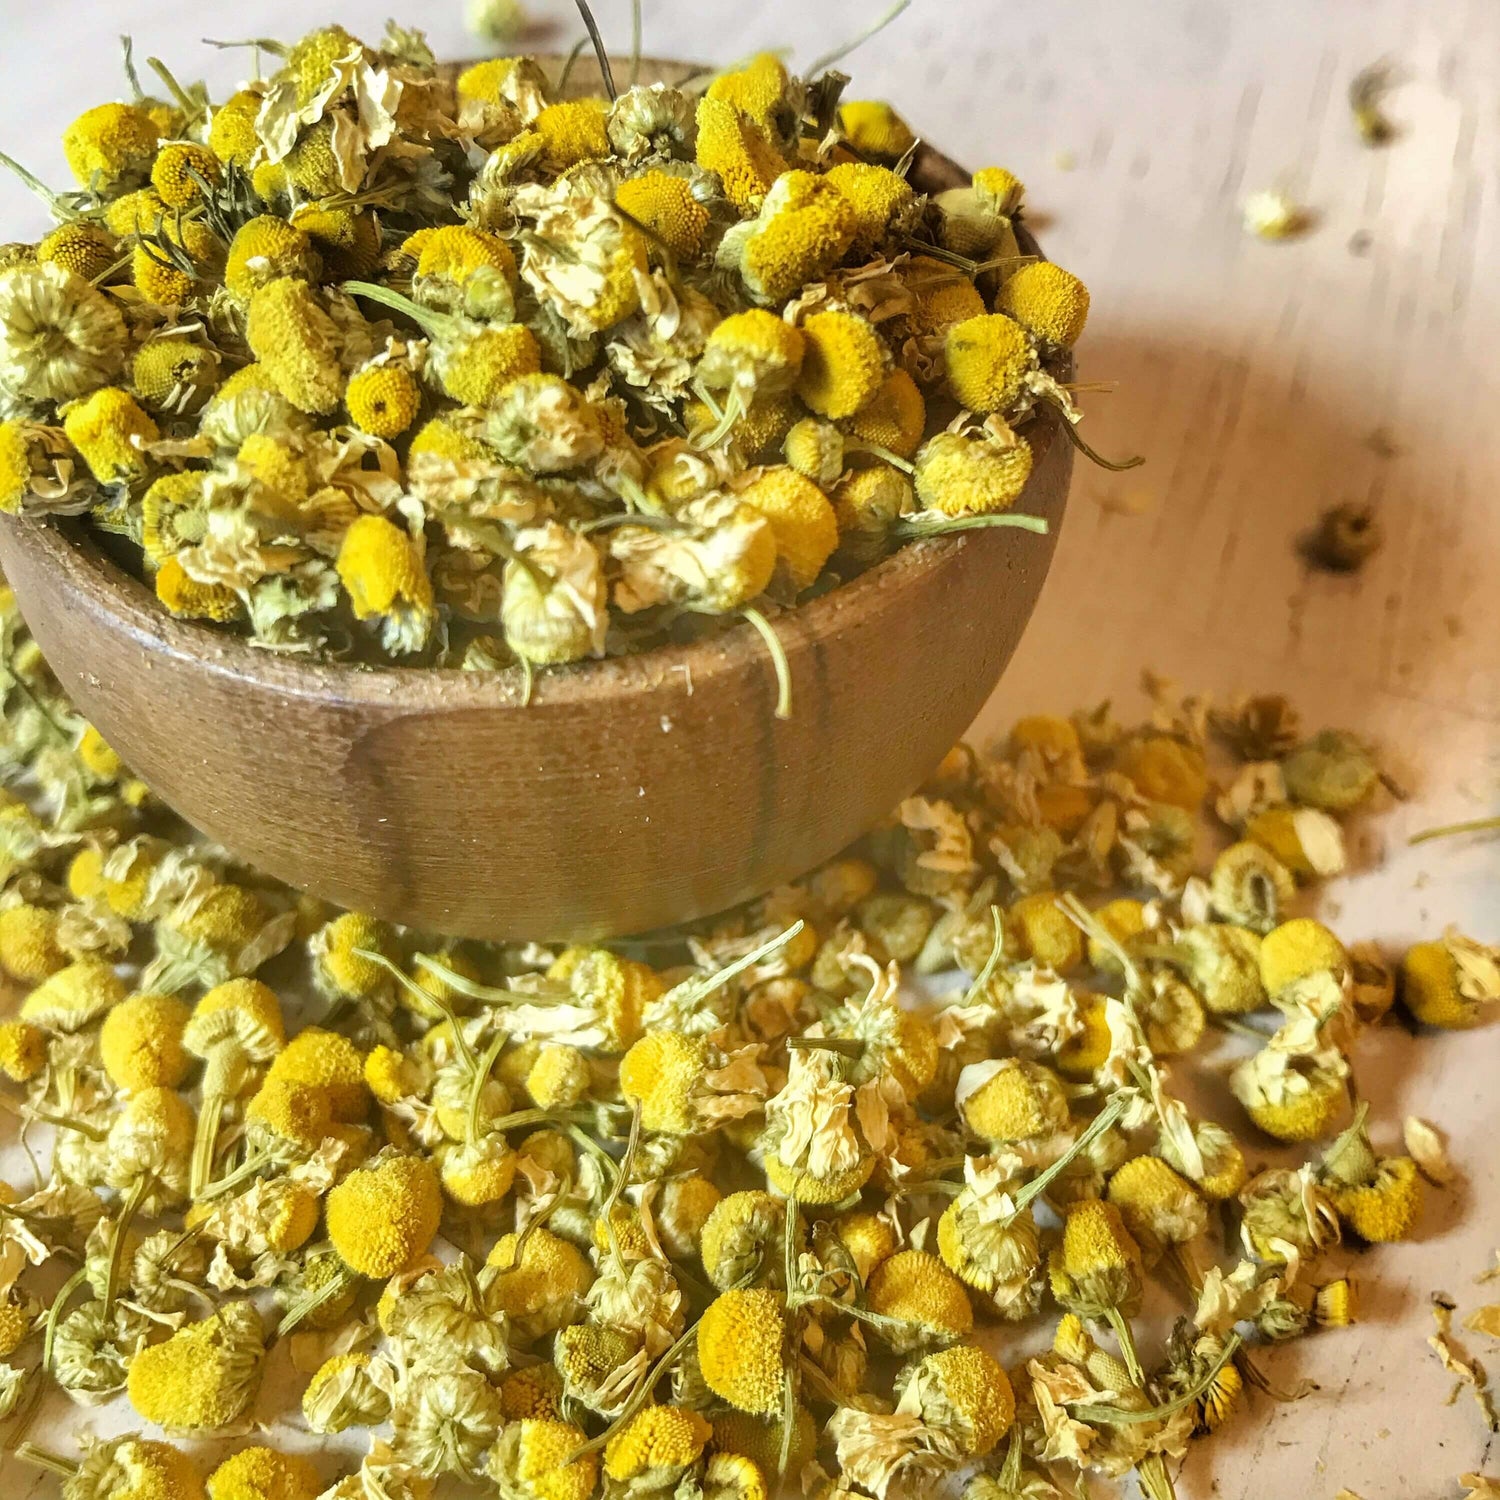 Loose dried chamomile flowers from Sacred Plant Co spread on a wooden surface, capturing the essence of high-quality organic herbs.